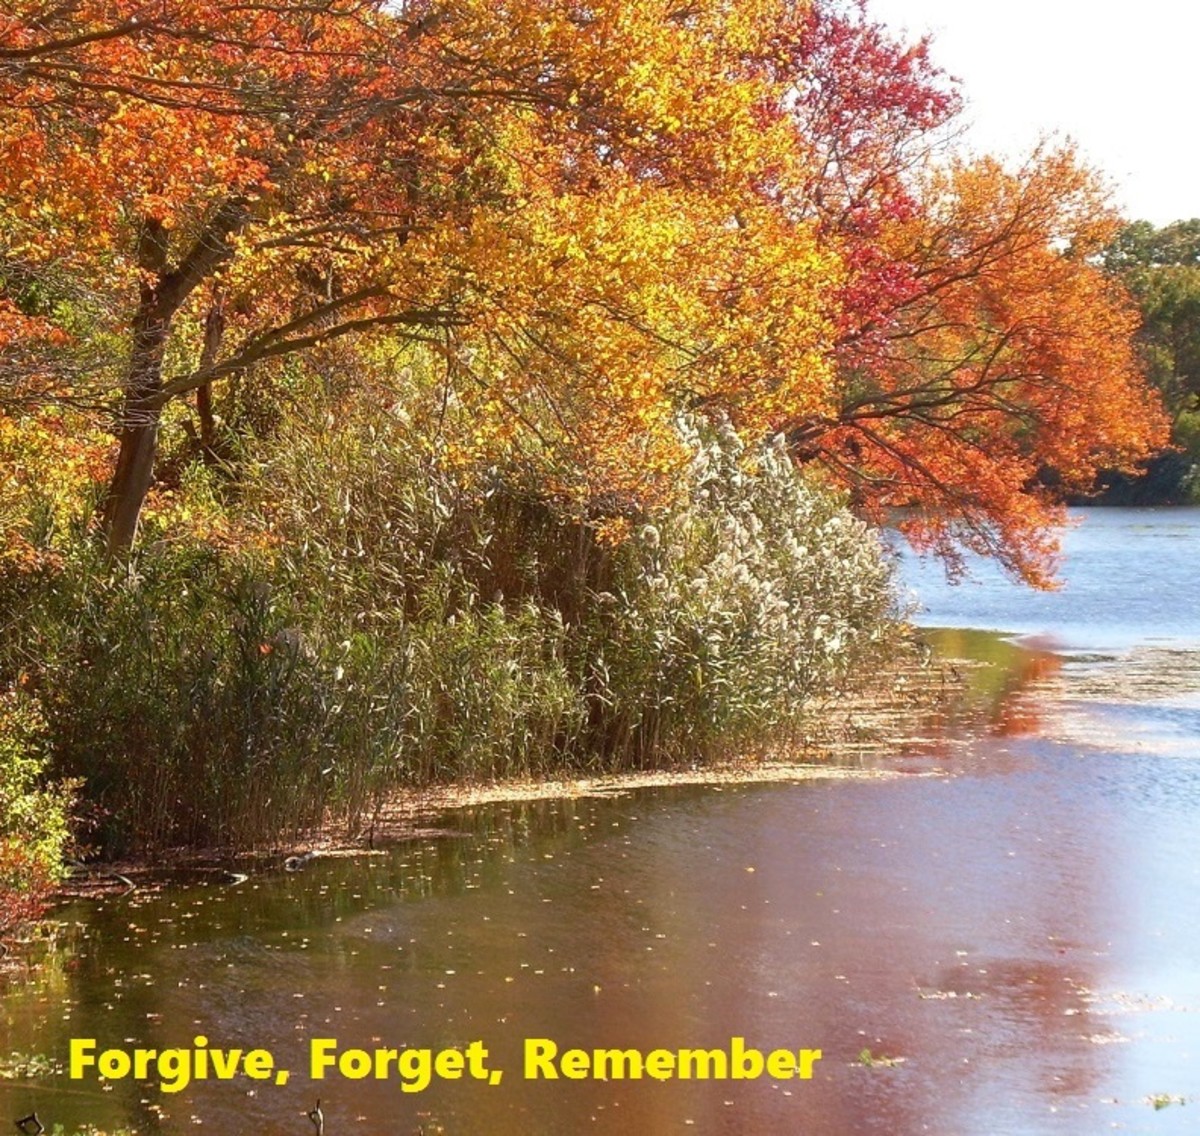 Forgive, Forget, Remember